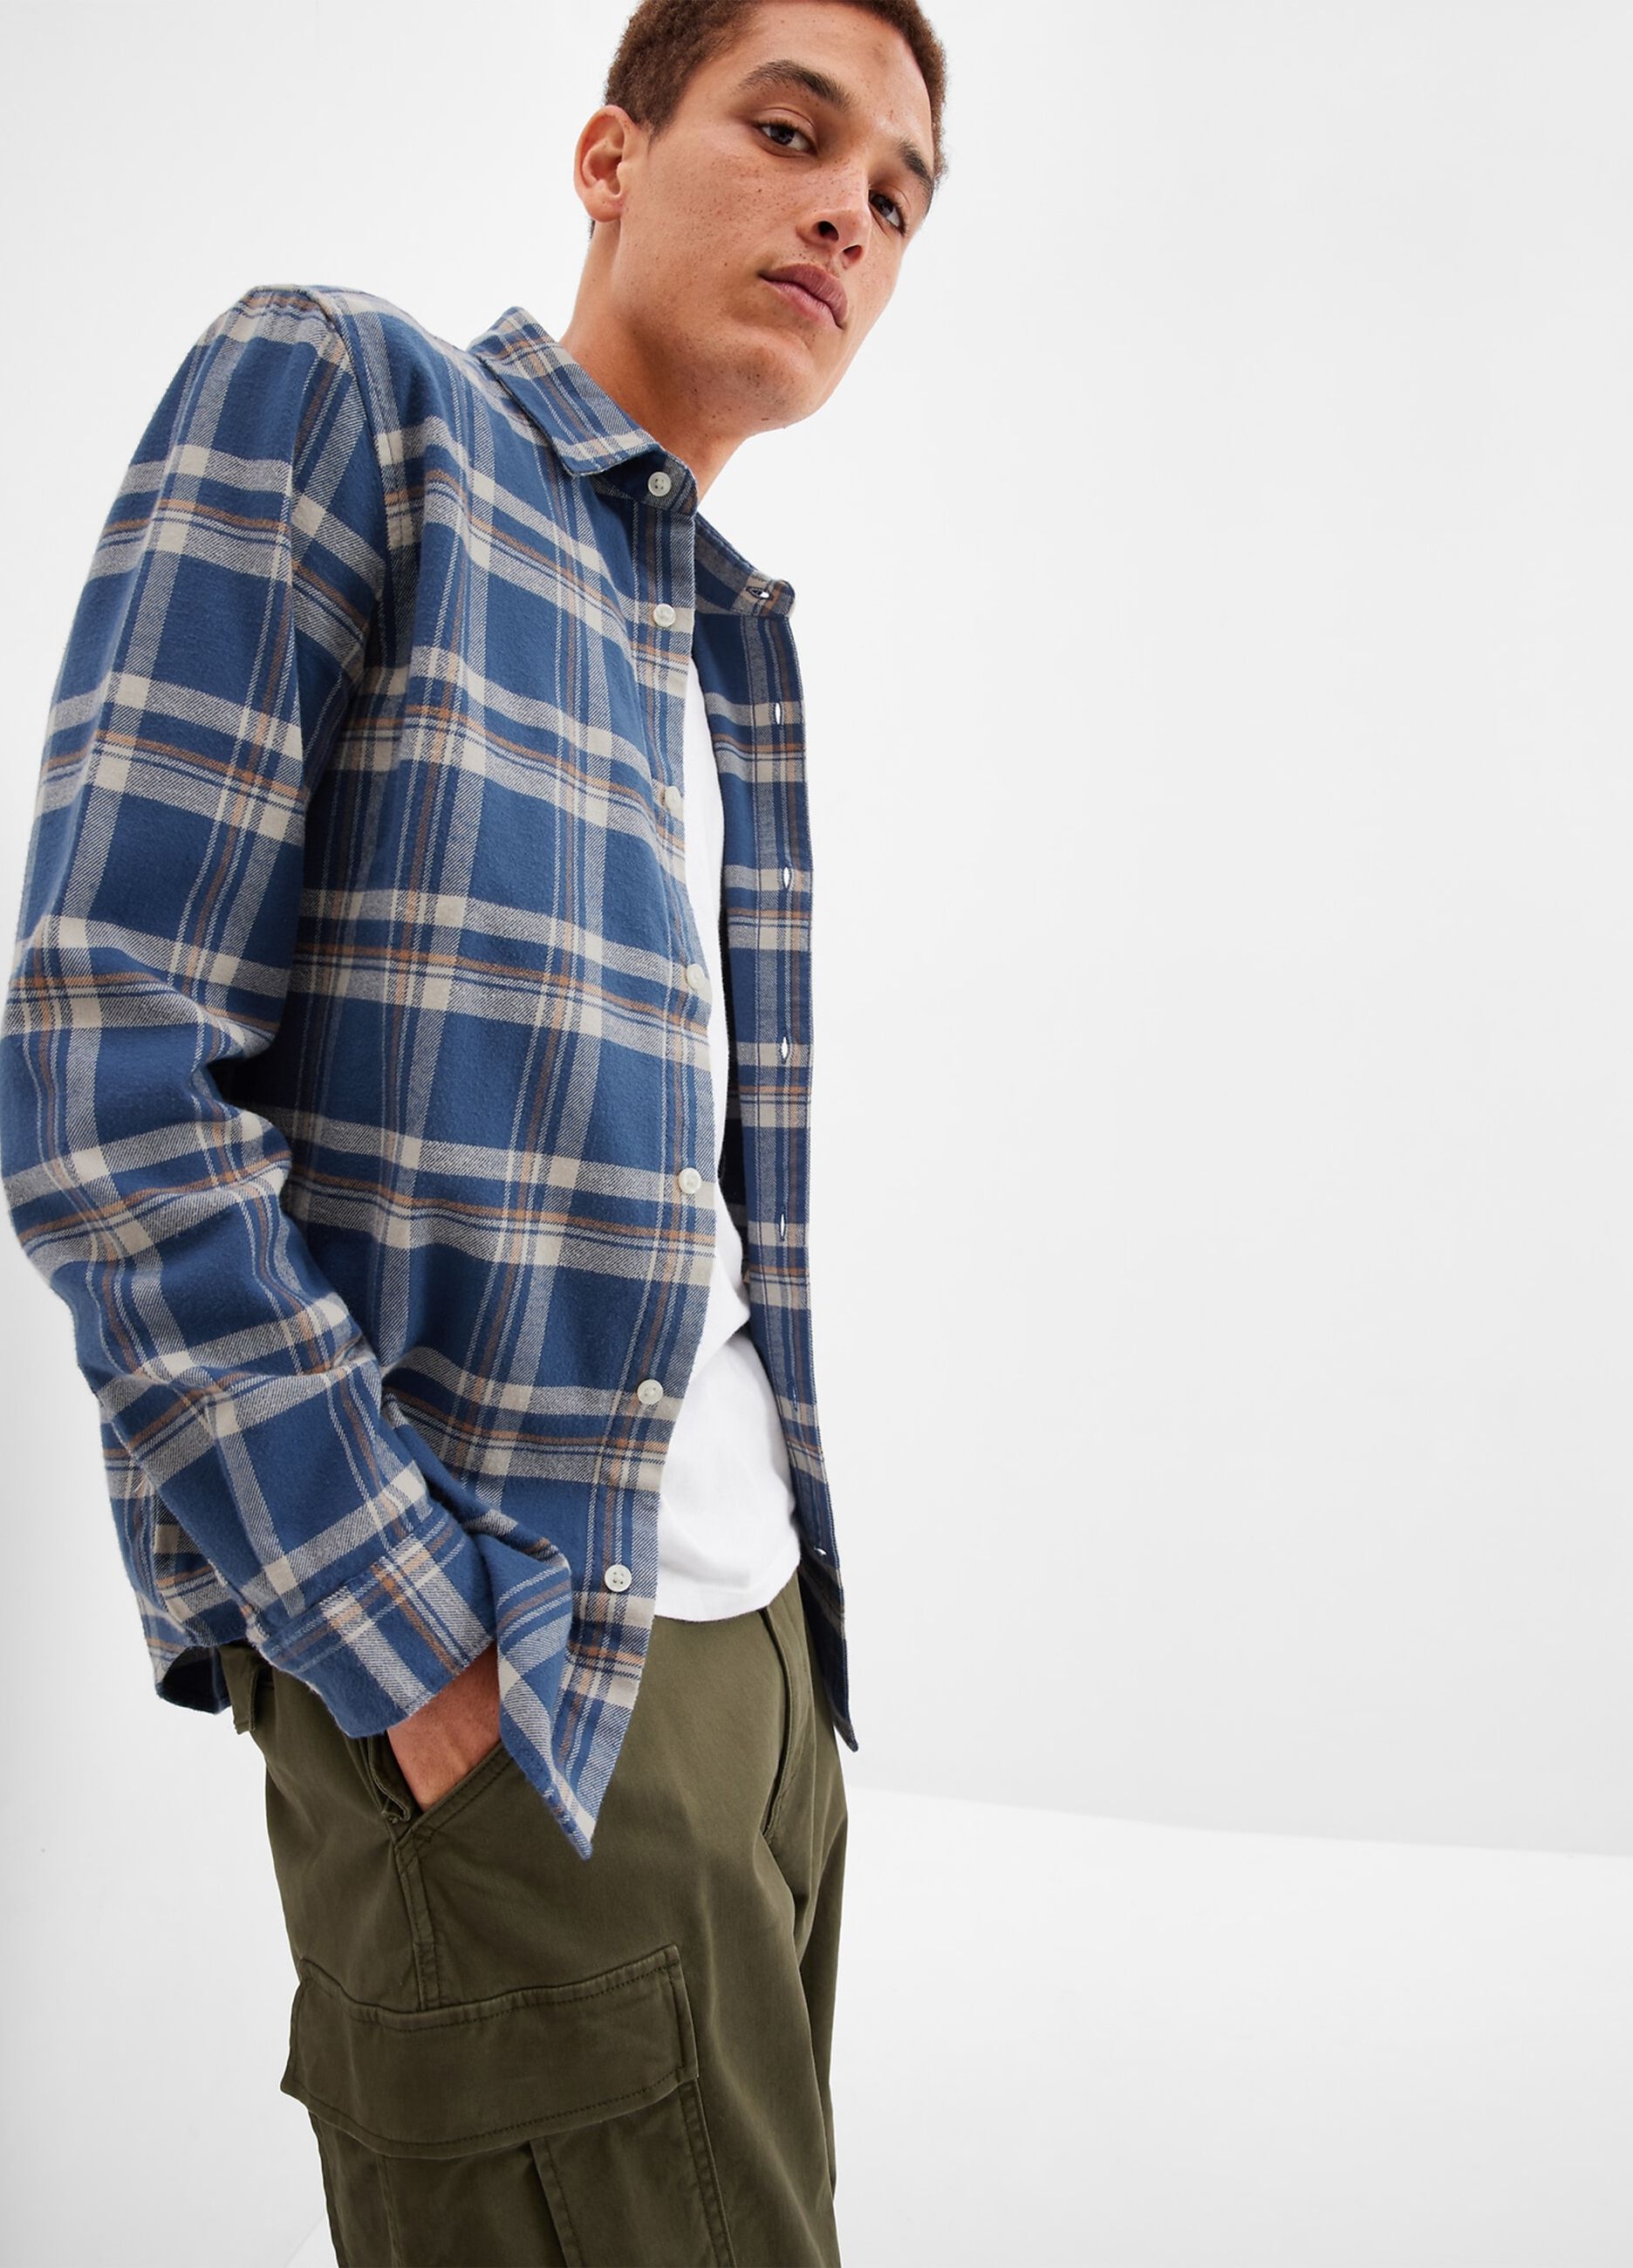 Flannel shirt with check pattern